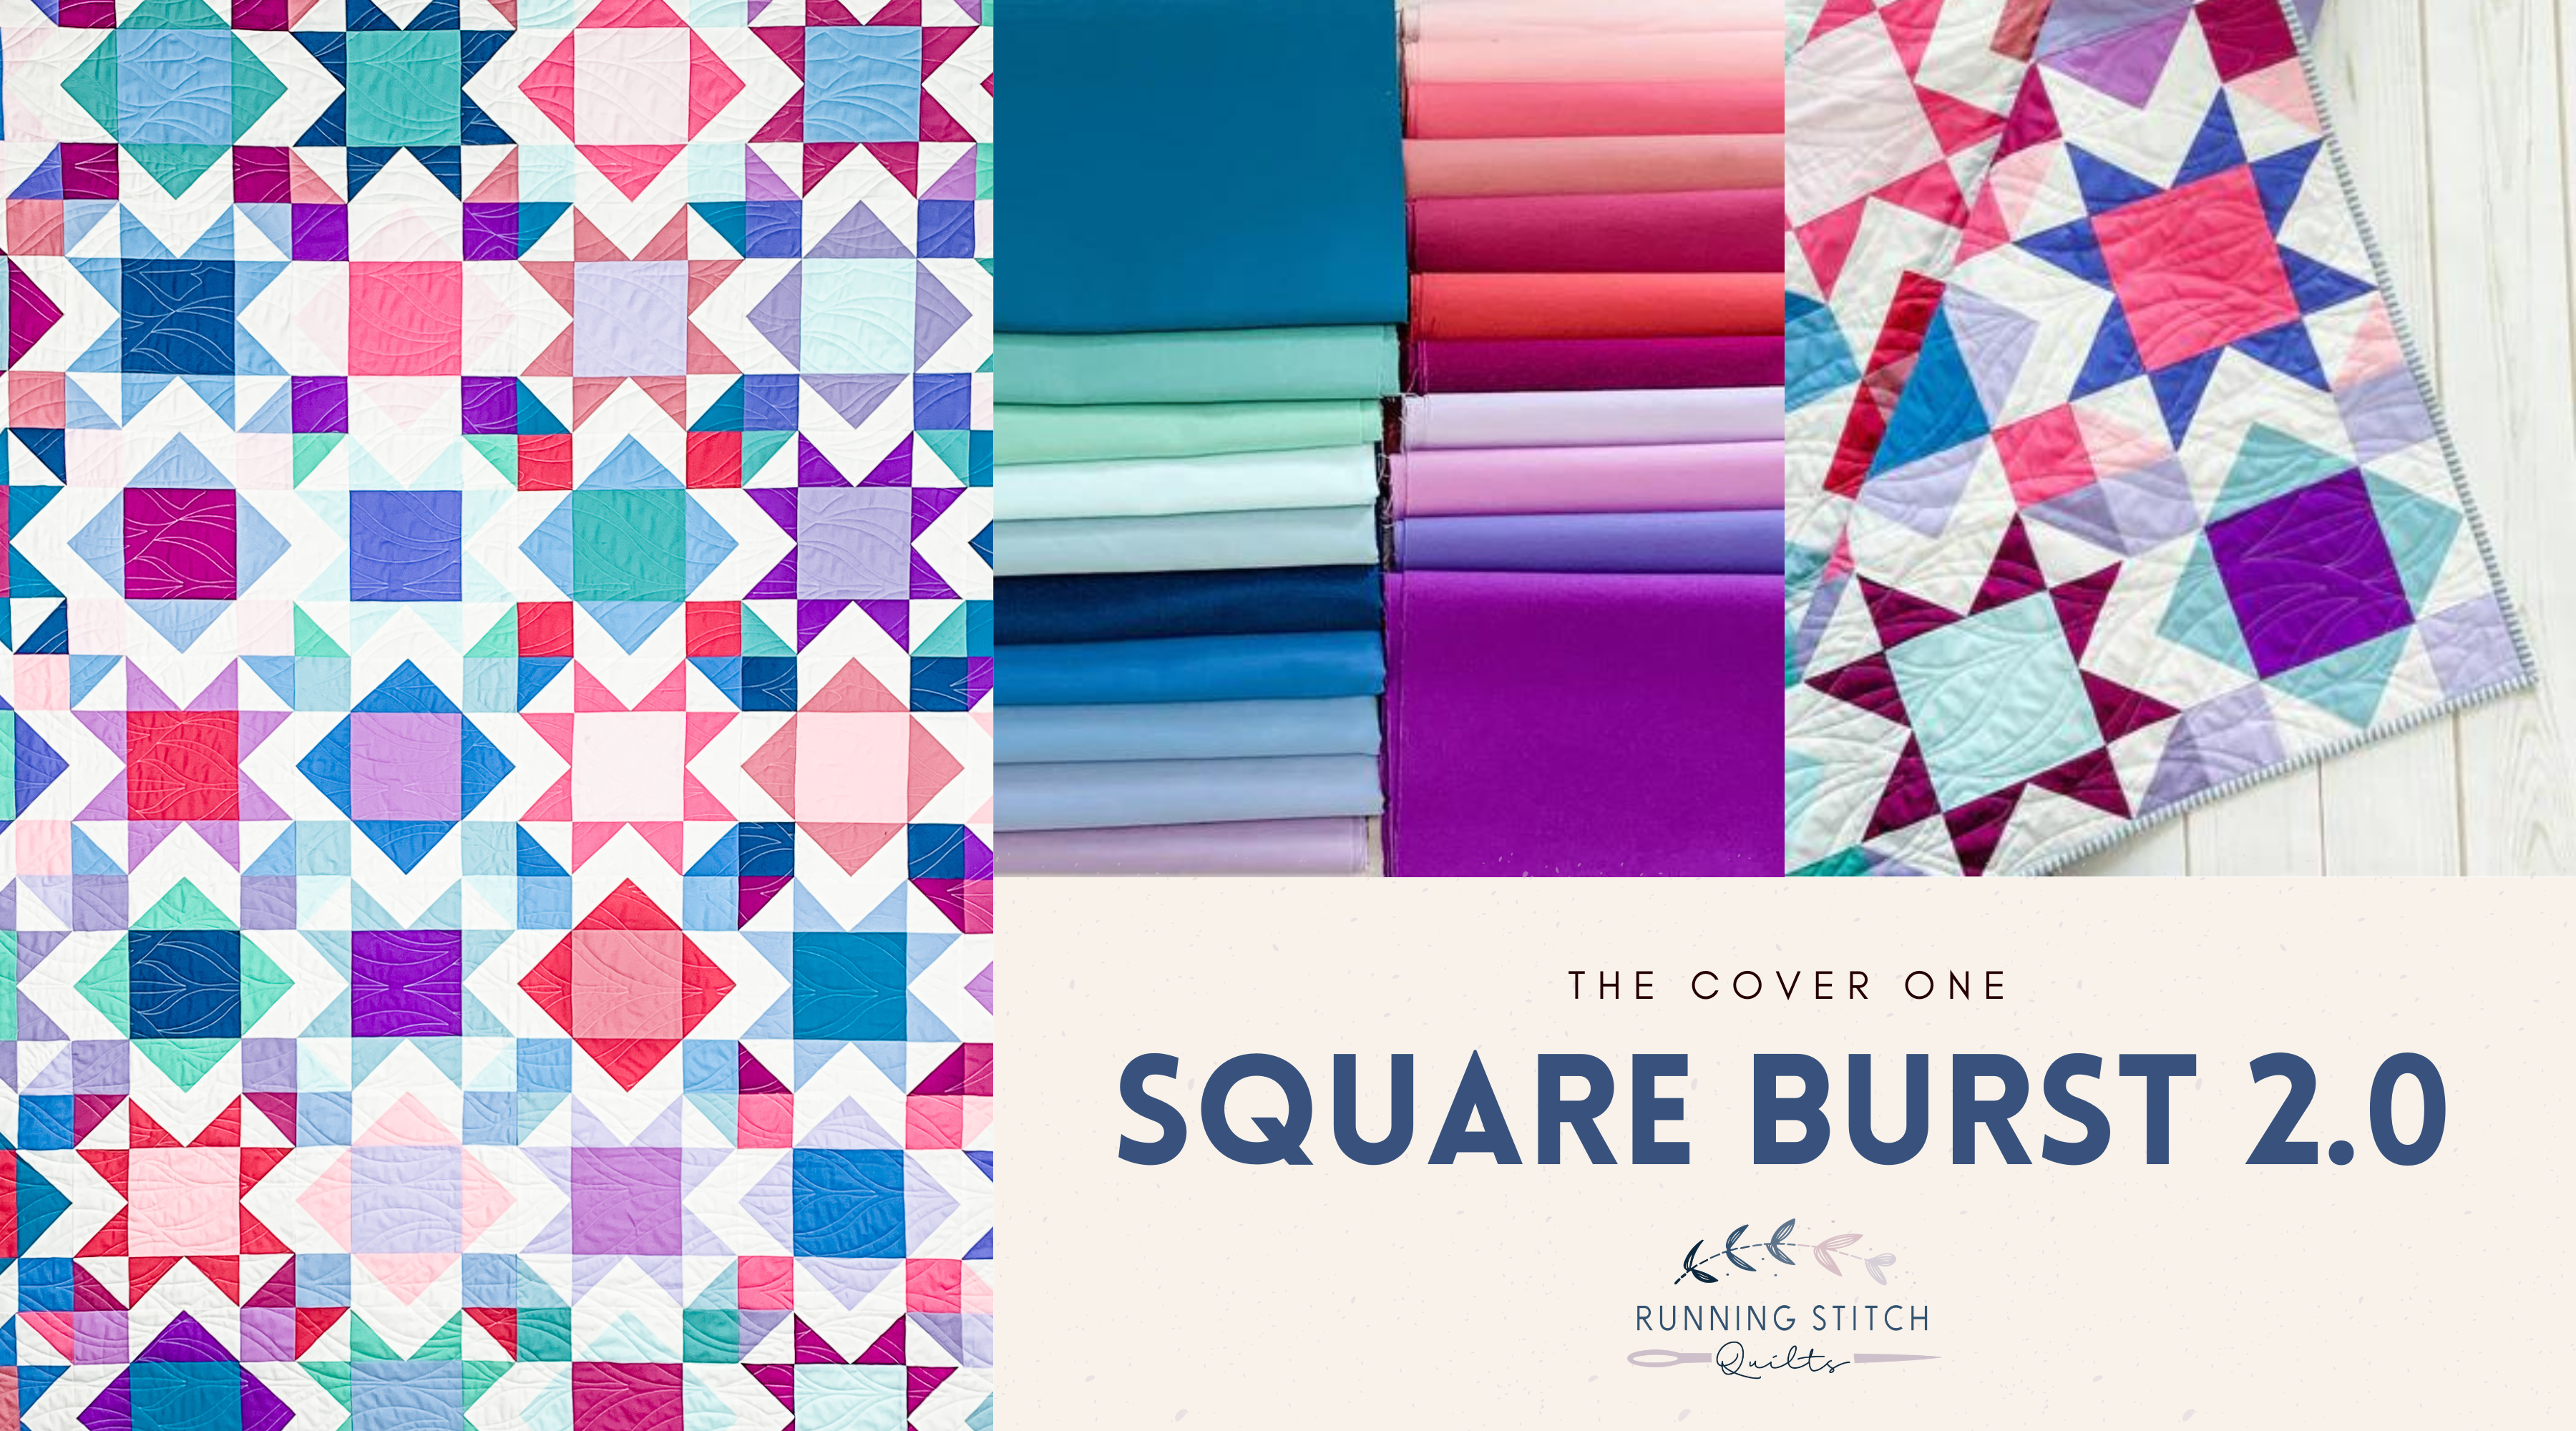 Square Burst 2.0 - The Cover Quilt - Running Stitch Quilts